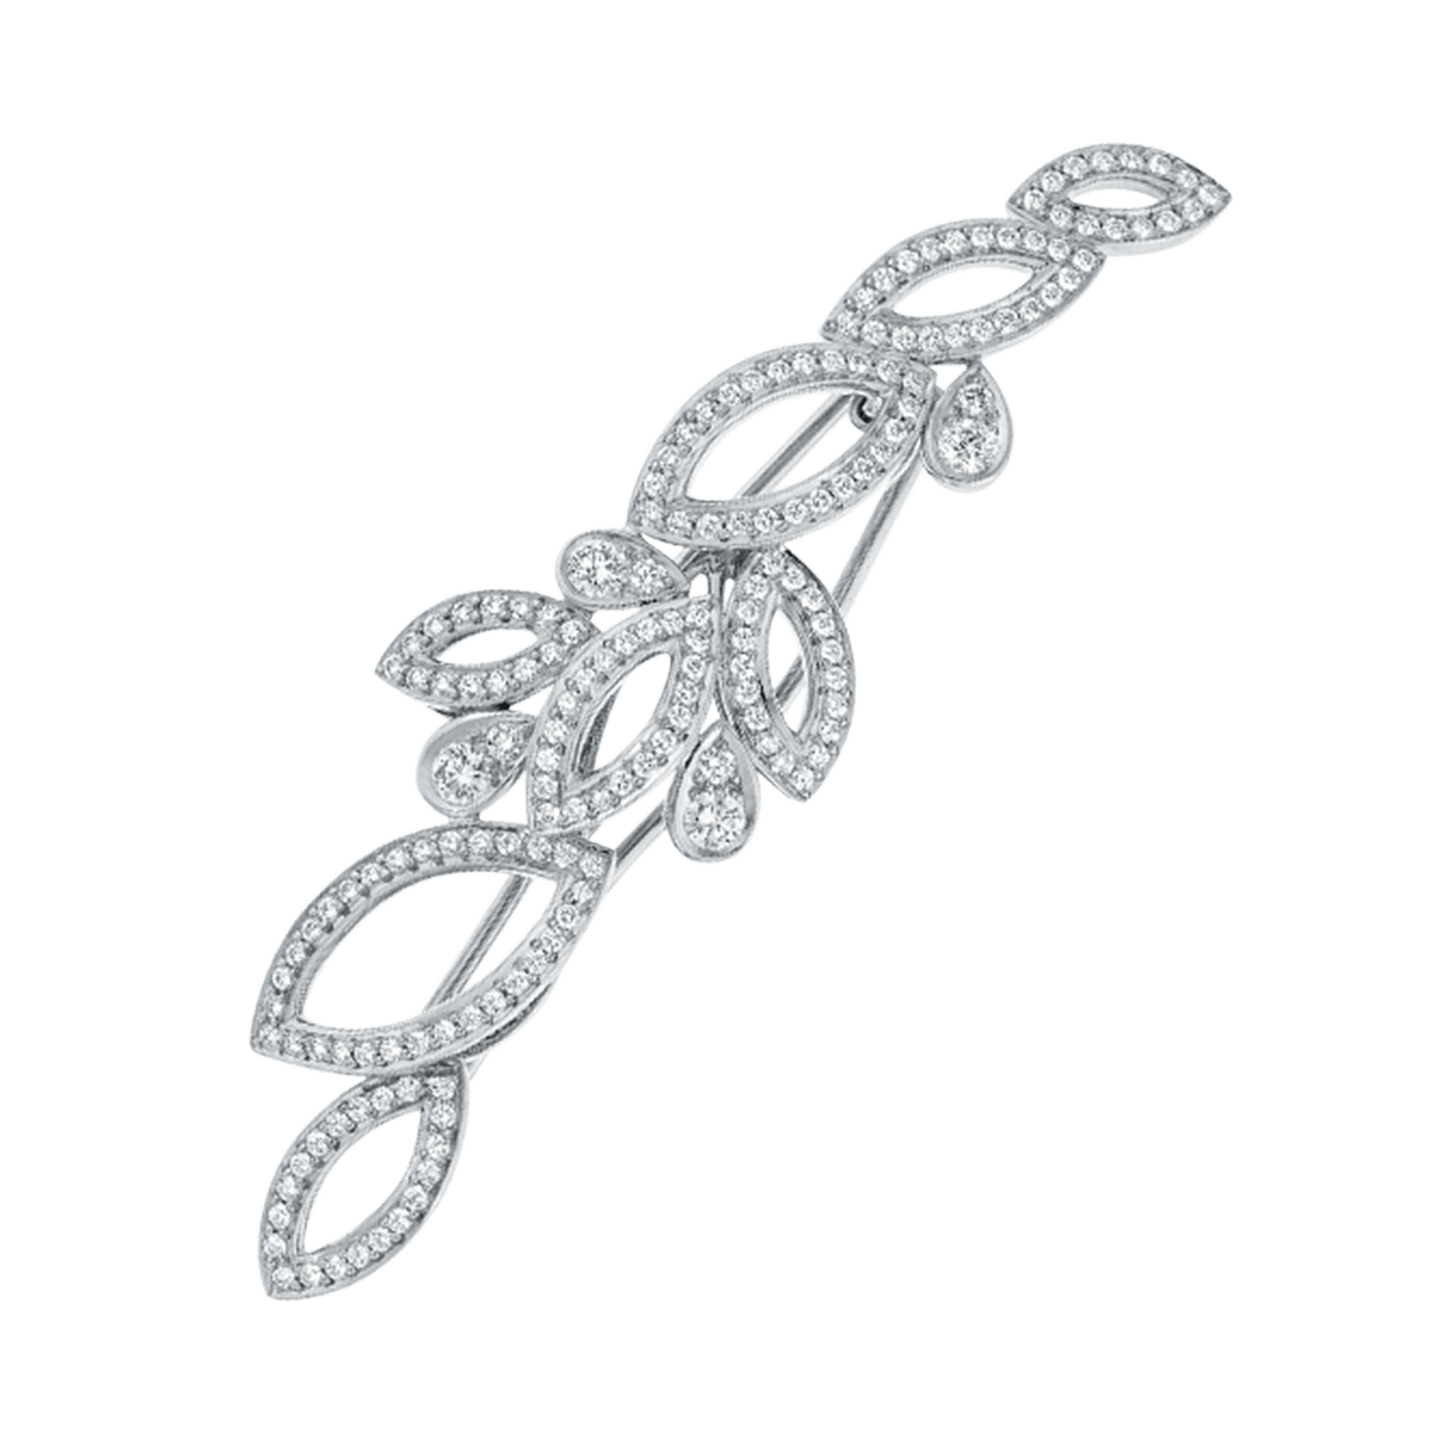 Lily Cluster Diamond Barrette in Platinum, Product Image 1